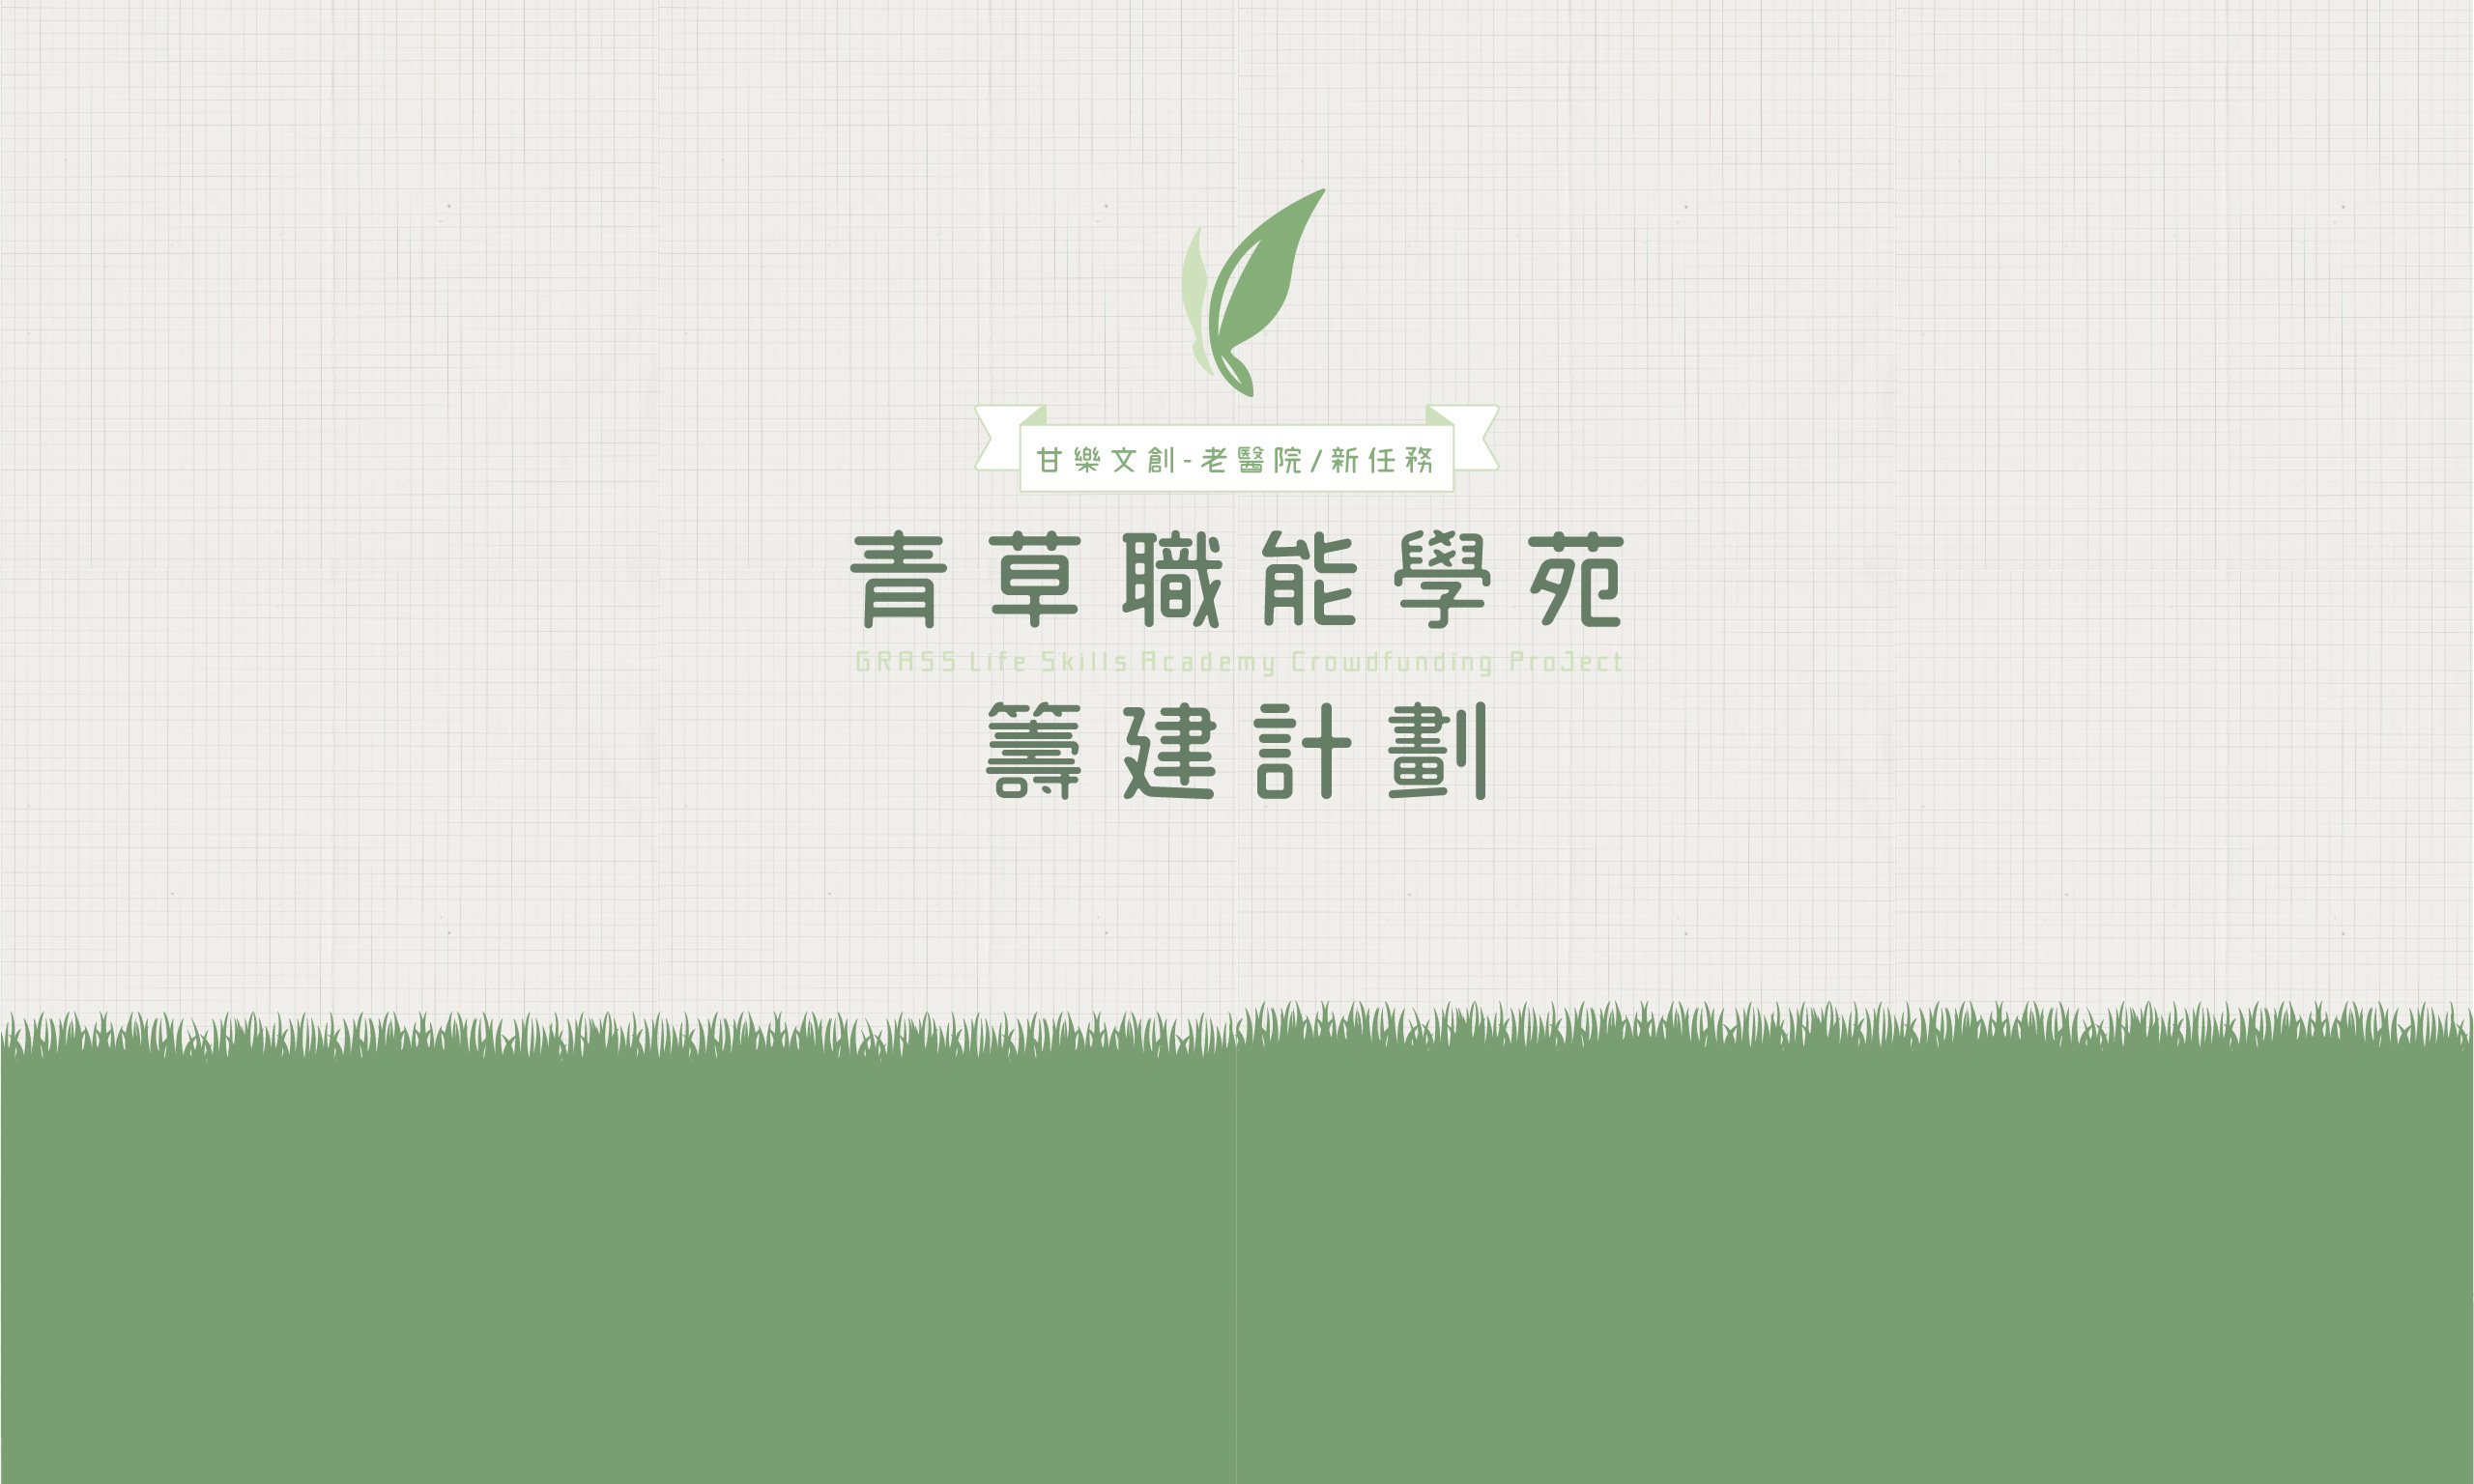 Fund Raising Project for Green Grass Occupational School - Taiwan community design